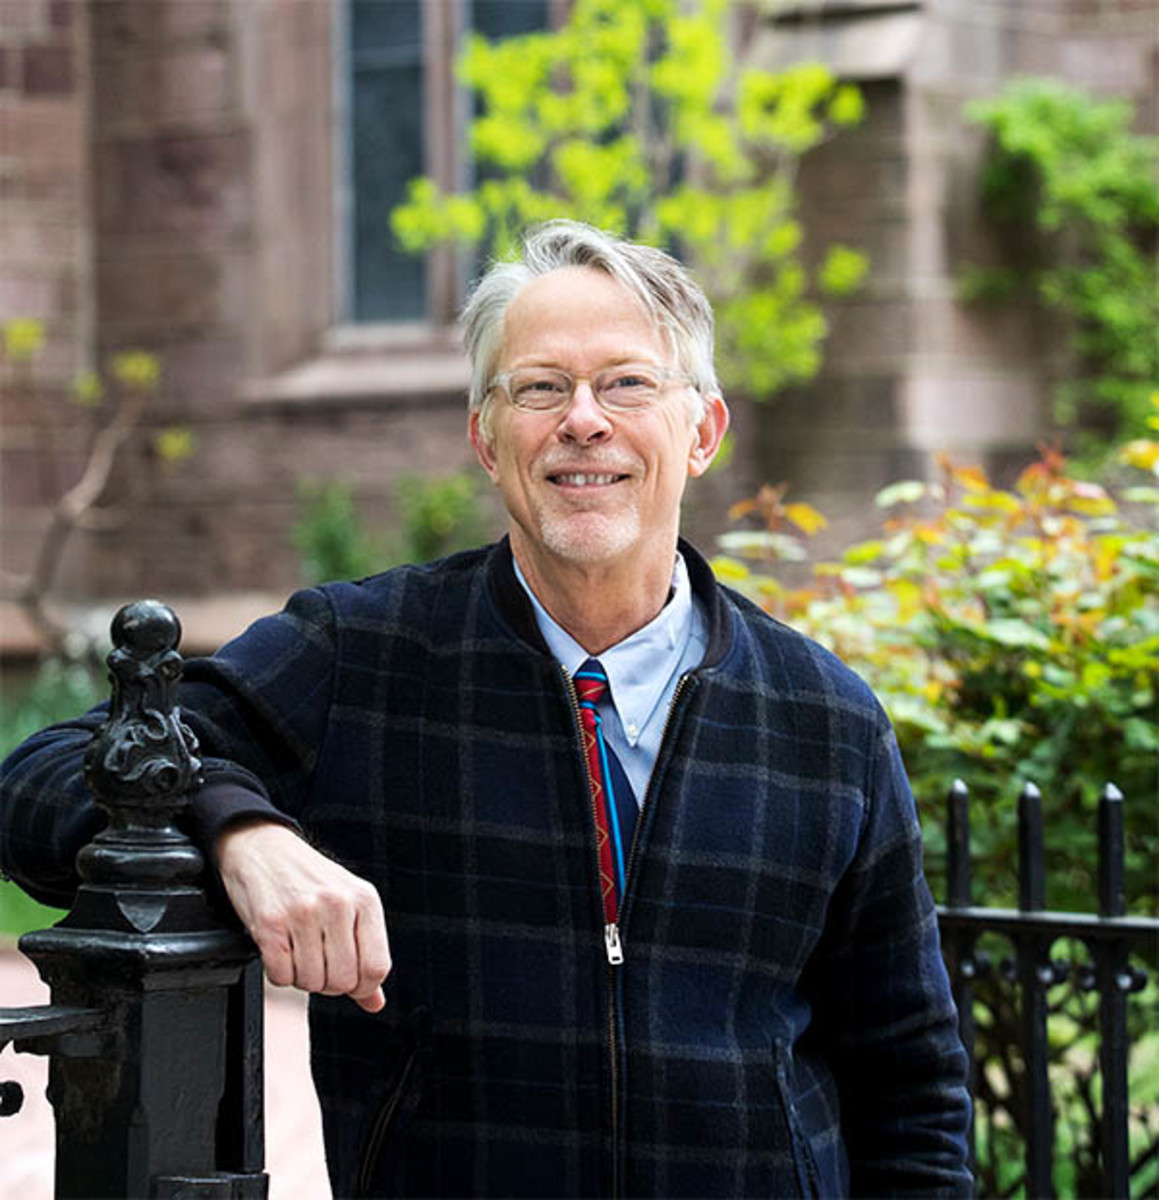 A. Robert Jaeger, president of Partners for Sacred Places, is the 2022 recipient of the prestigious James Biddle Award for lifetime achievement from the Preservation Alliance of Greater Philadelphia.